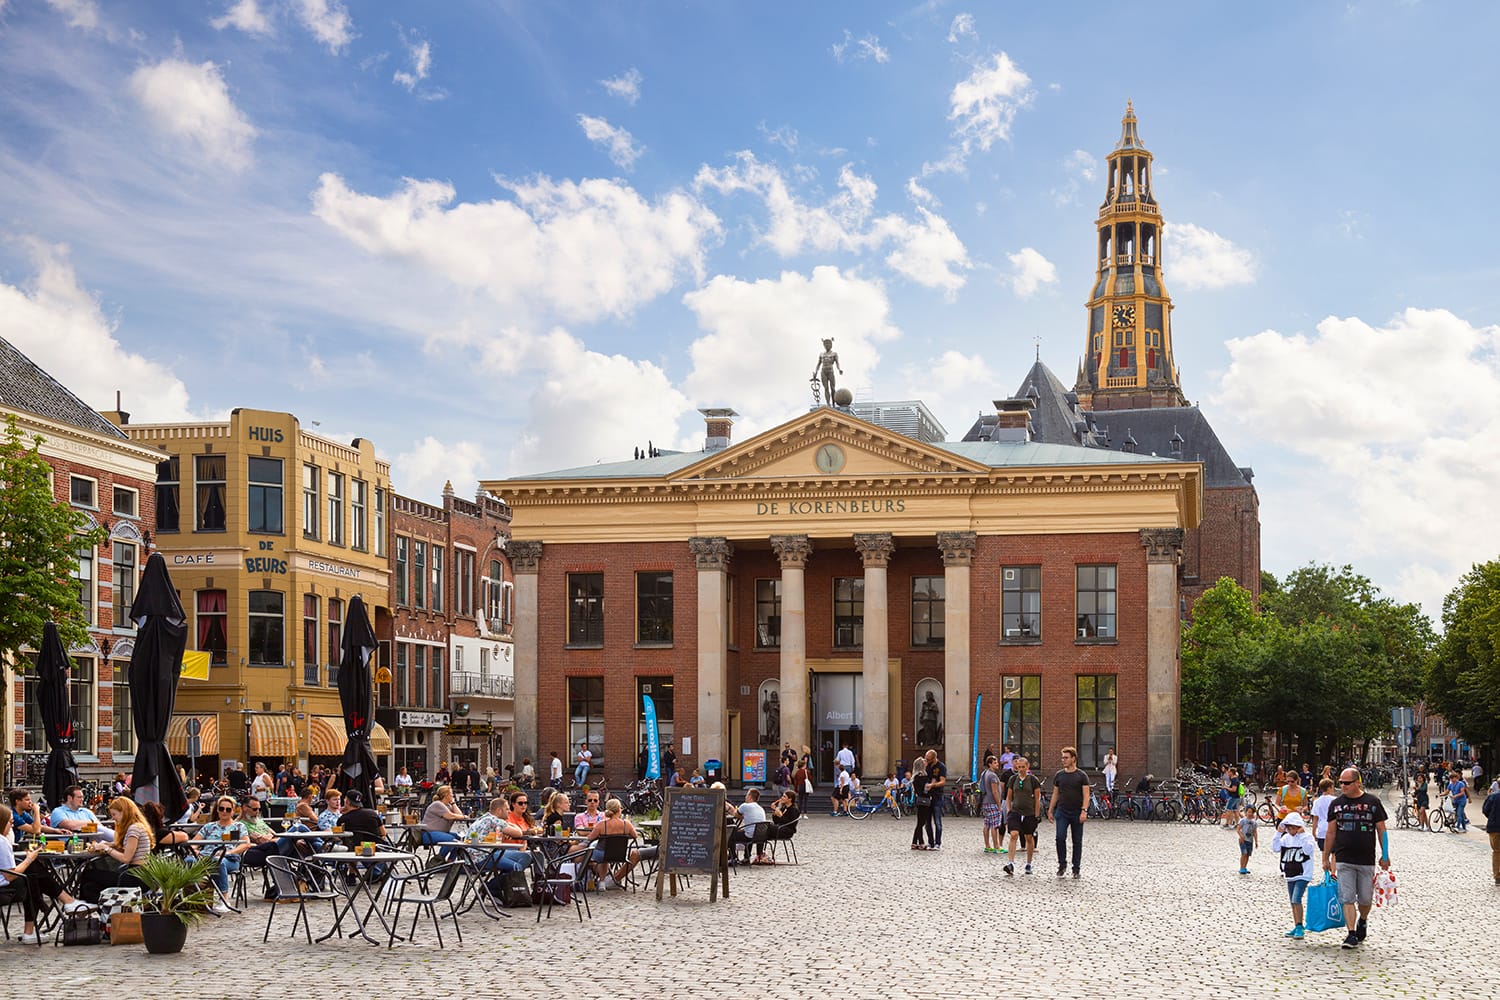 Grain exchange building and church tower on the fish market square in the student city of Groningen.